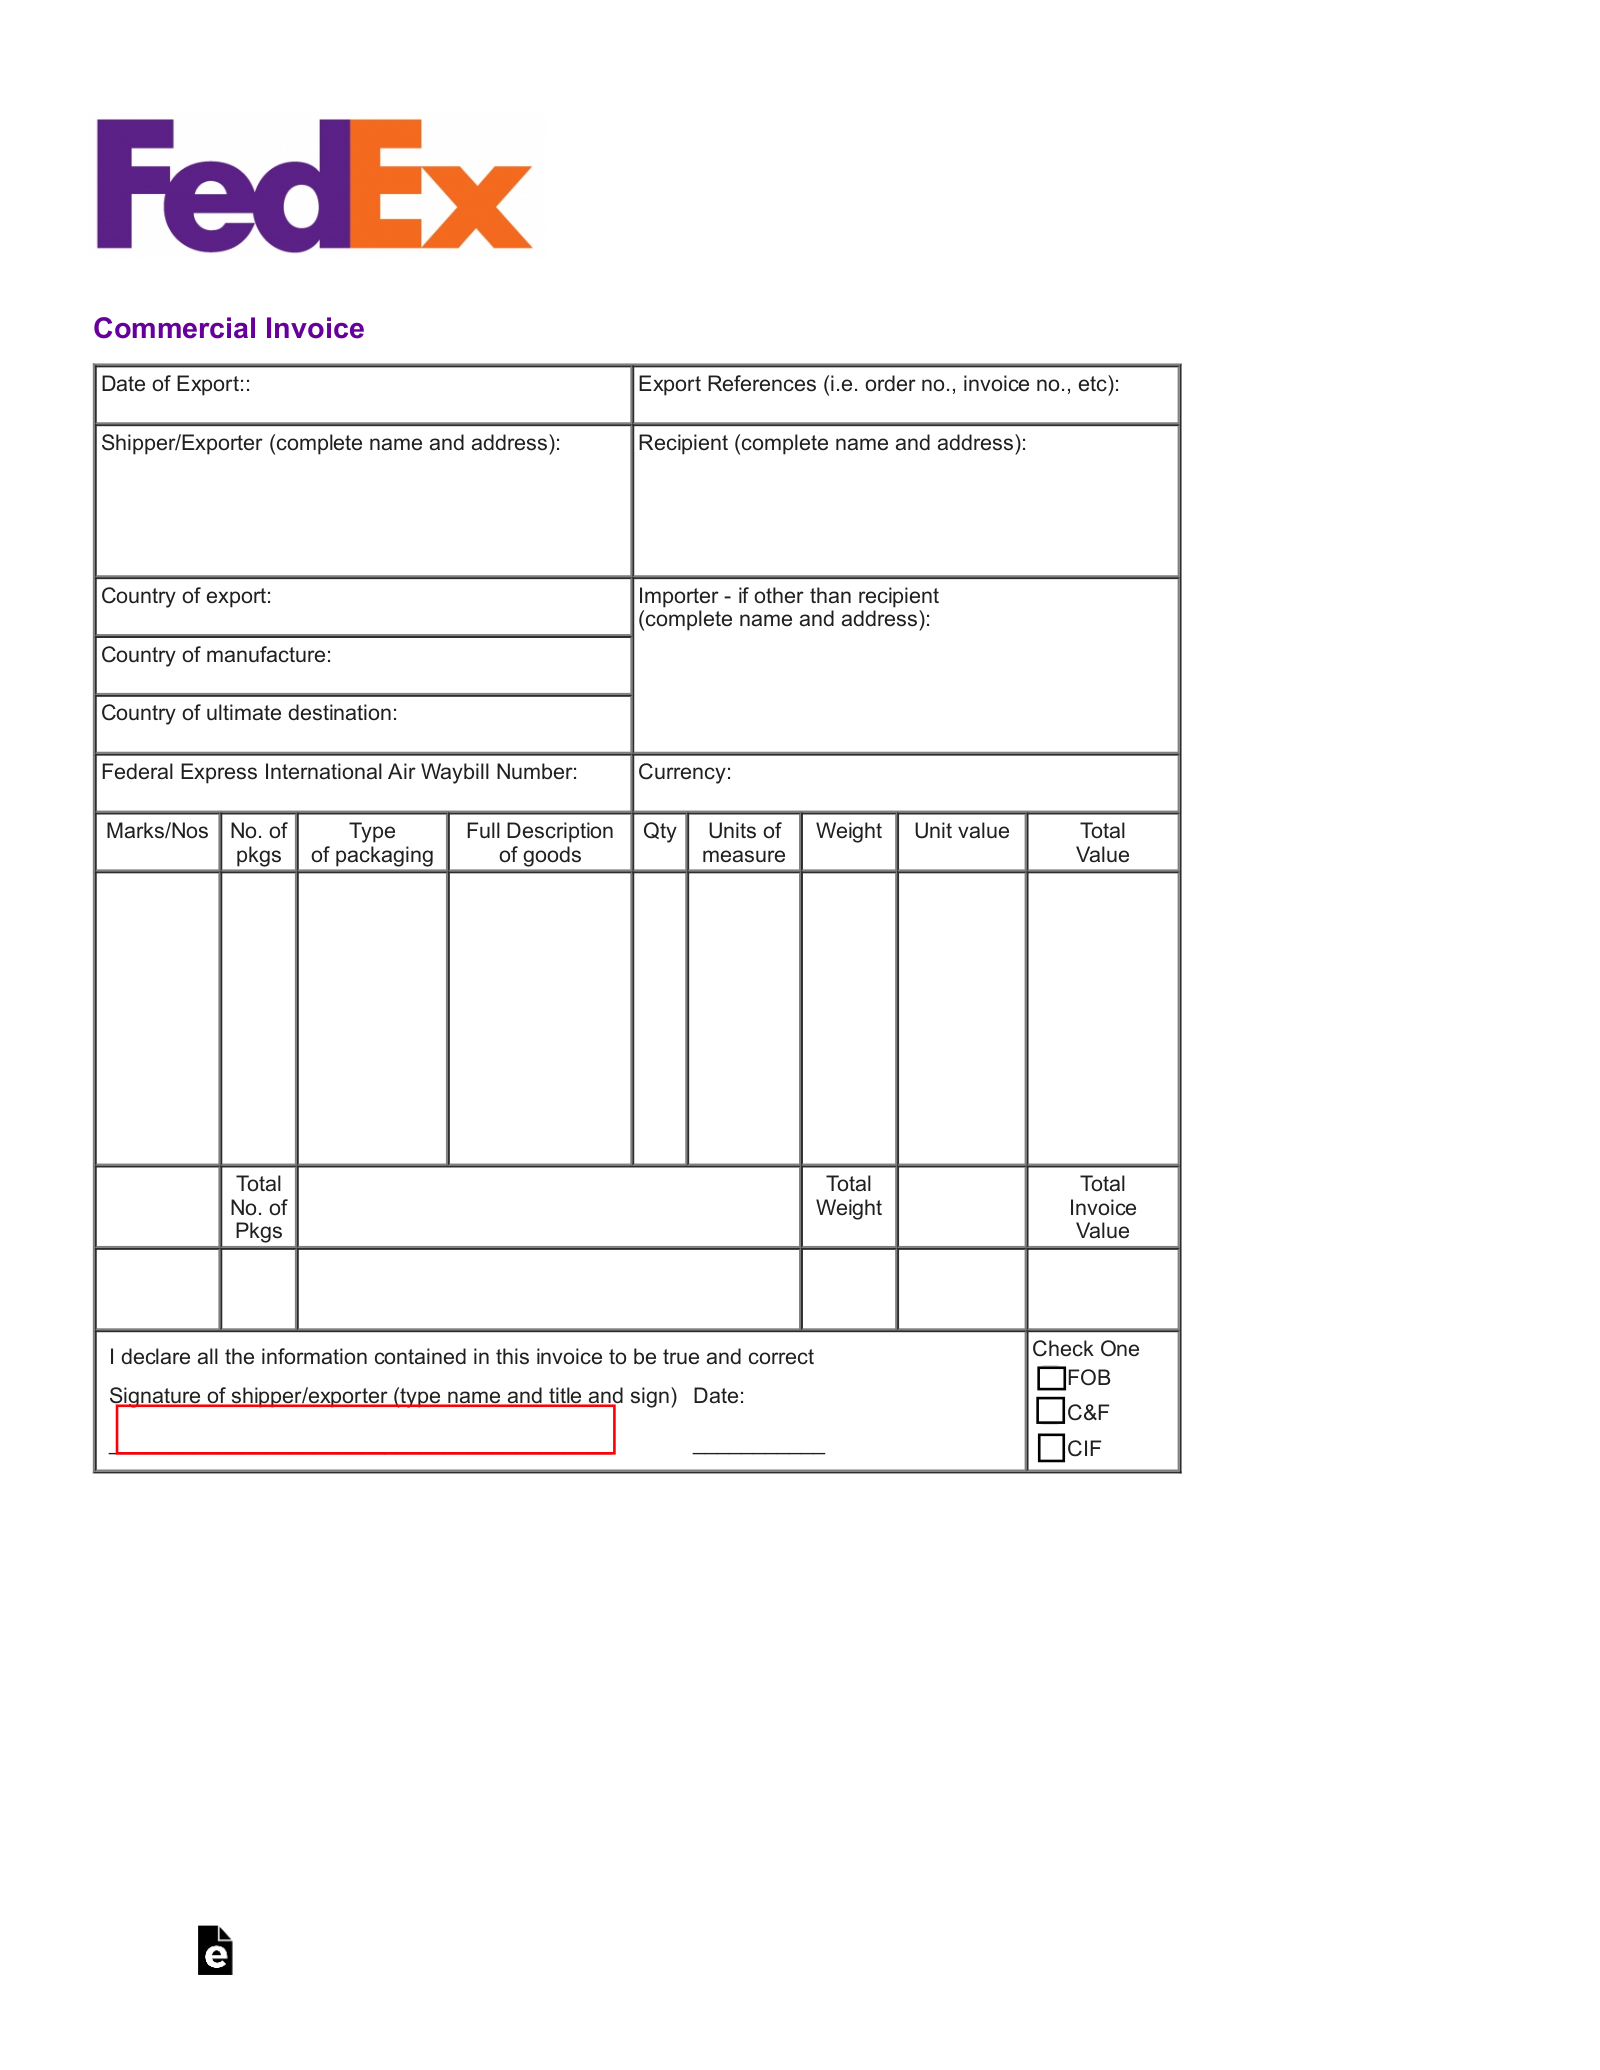 Commercial Invoice Pdf from eforms.com